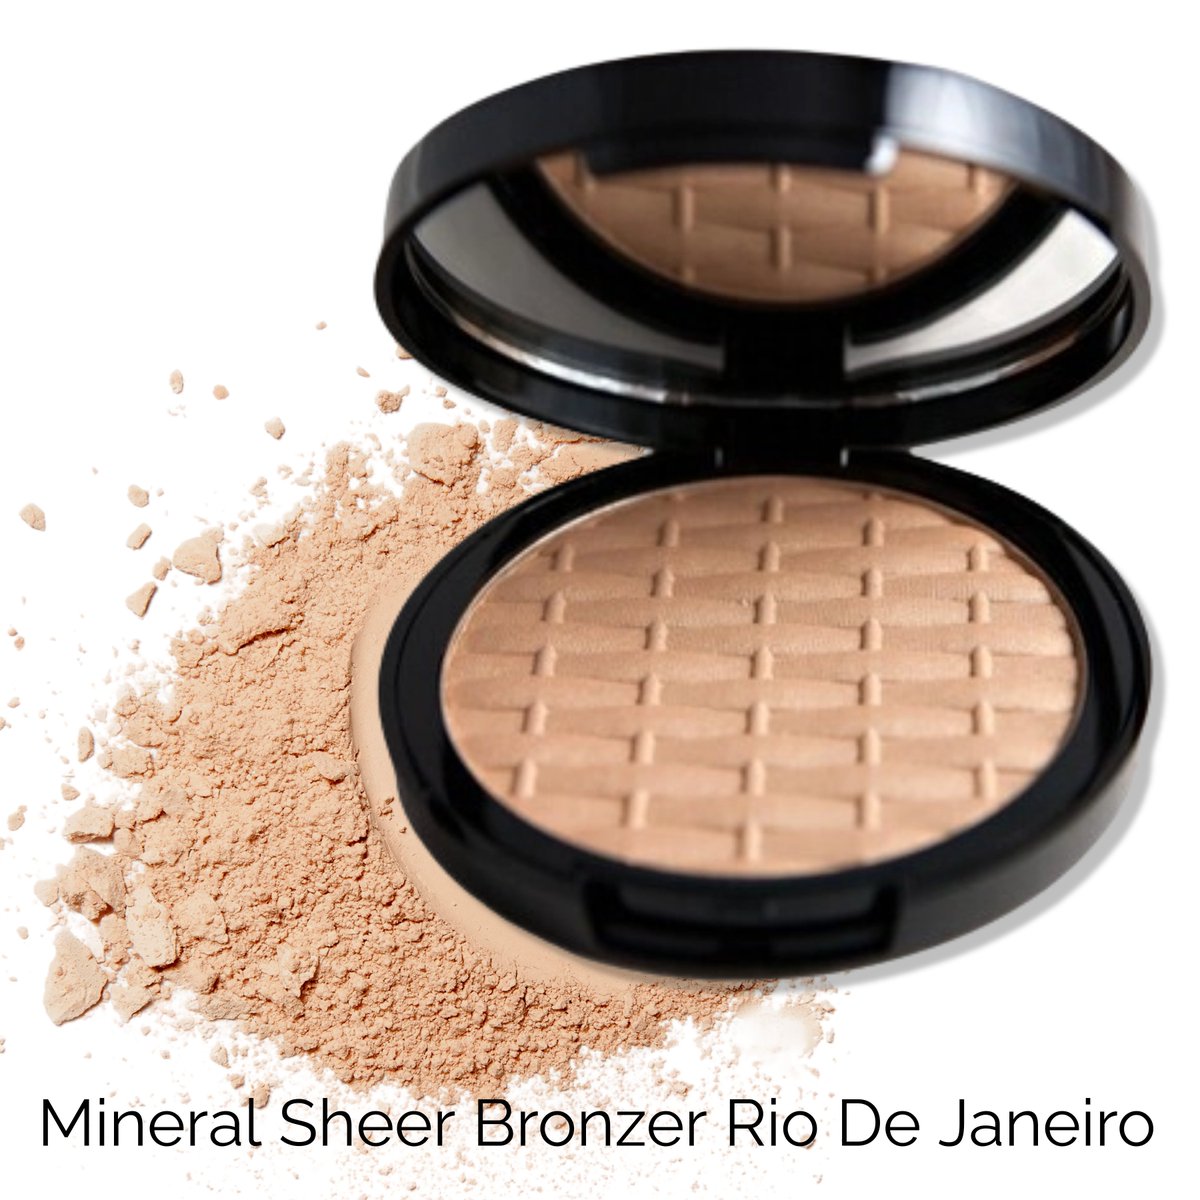 Get ready to glow like never before with our Mineral Sheer Bronzer!
Try our Mineral Sheer Bronzer today and let your natural radiance shine! 🠇🠇
justforredheads.com/mineral-sheer-…

#RedheadMakeup #MineralBronzer #RedheadApproved #RedHair #BeautyProducts #JustforRedheadsOfficial #ginger